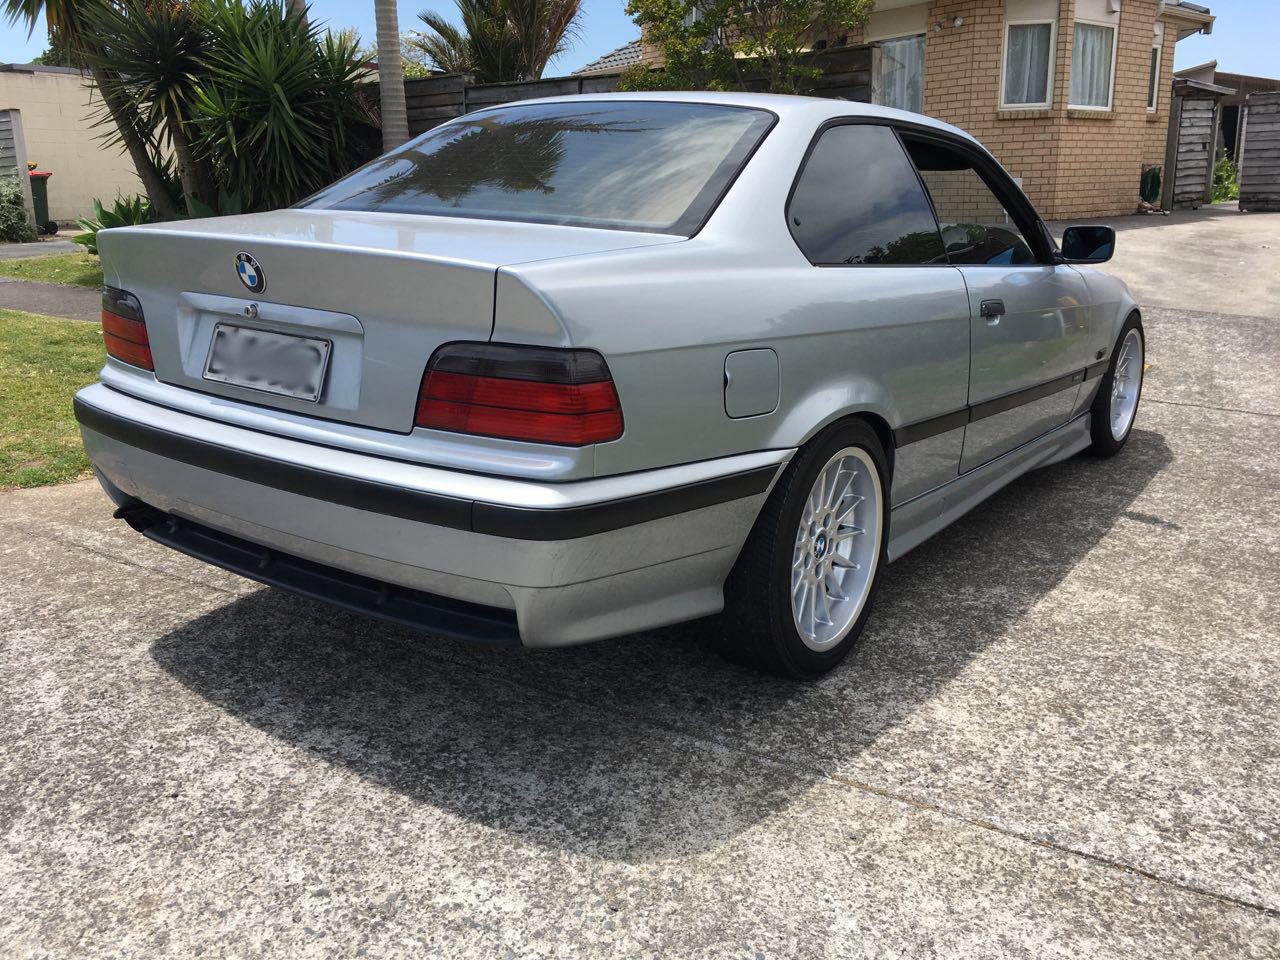 BMW E36 328i With New Wheels And Additions